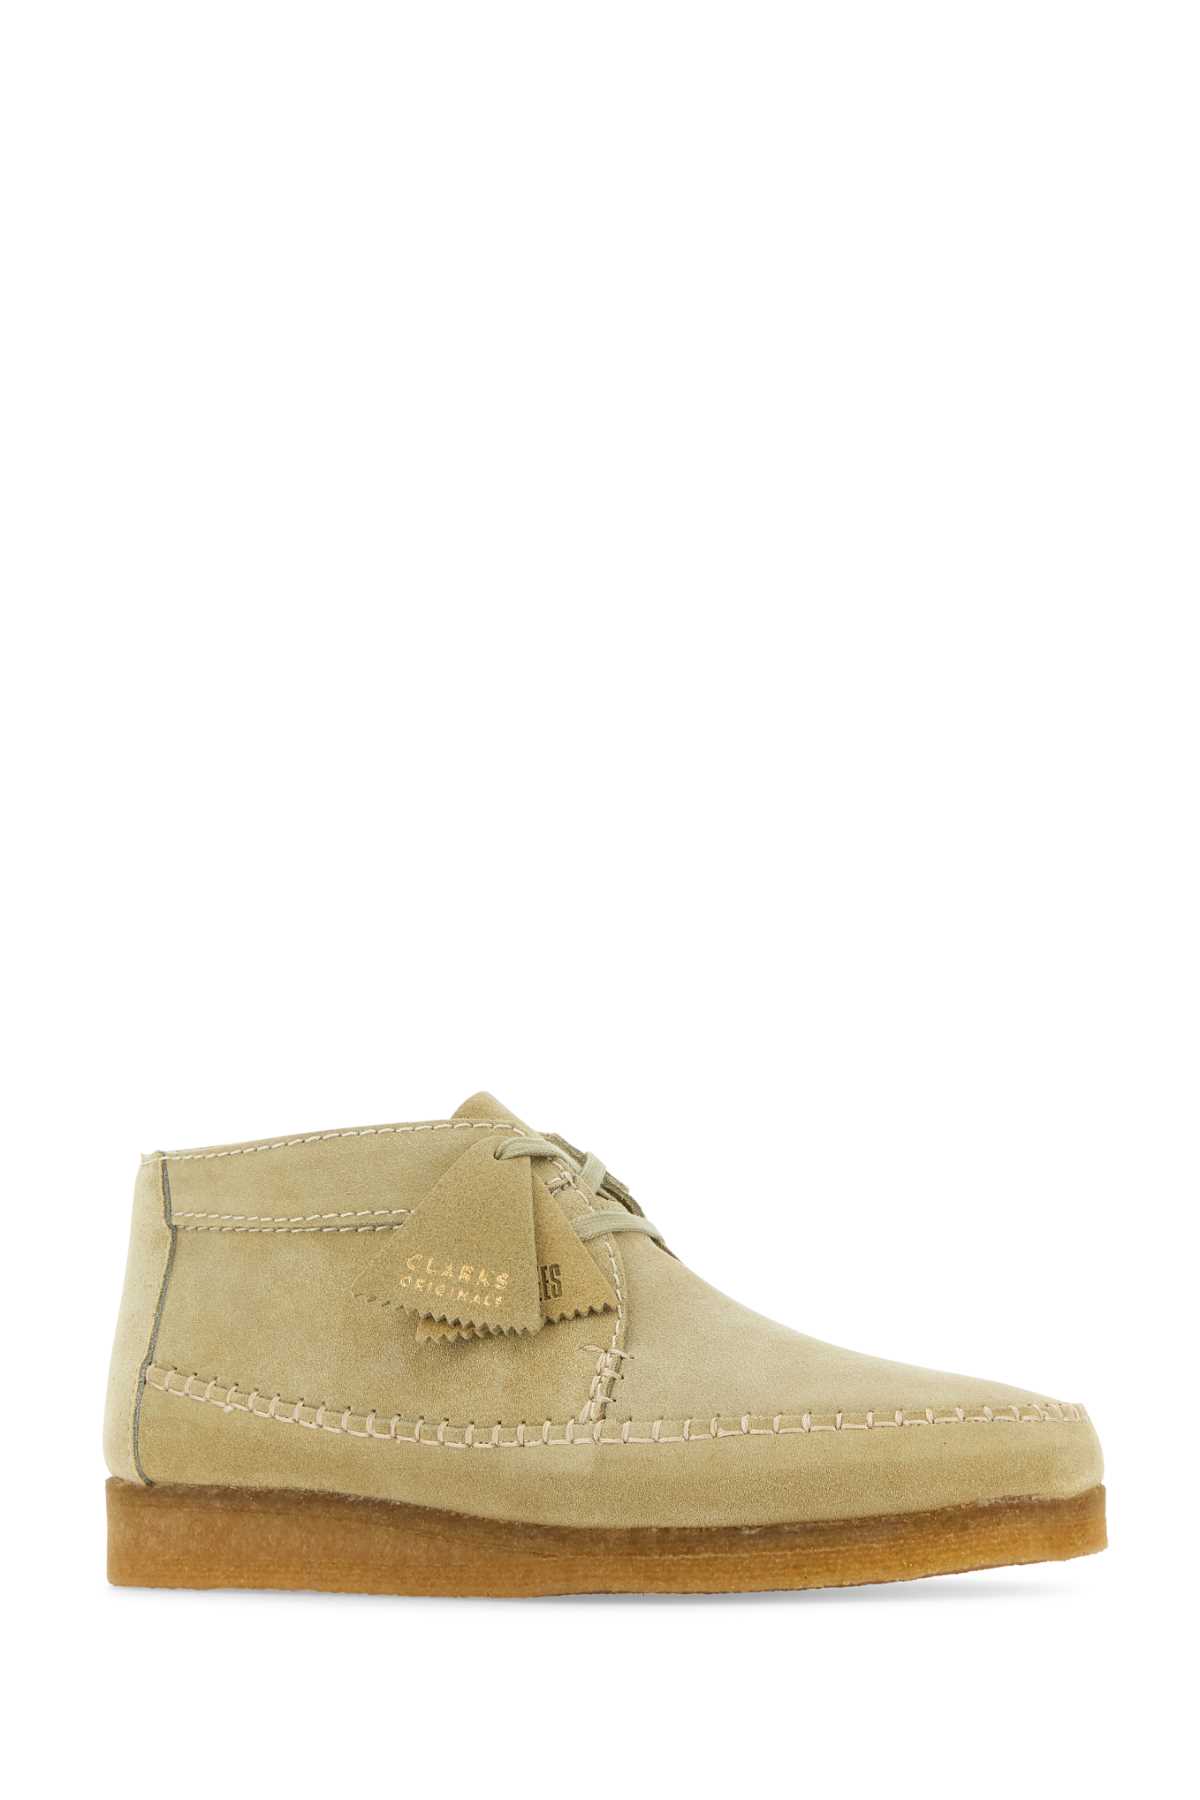 Shop Clarks Beige Suede Weaver Ankle Boots In Maplesuede